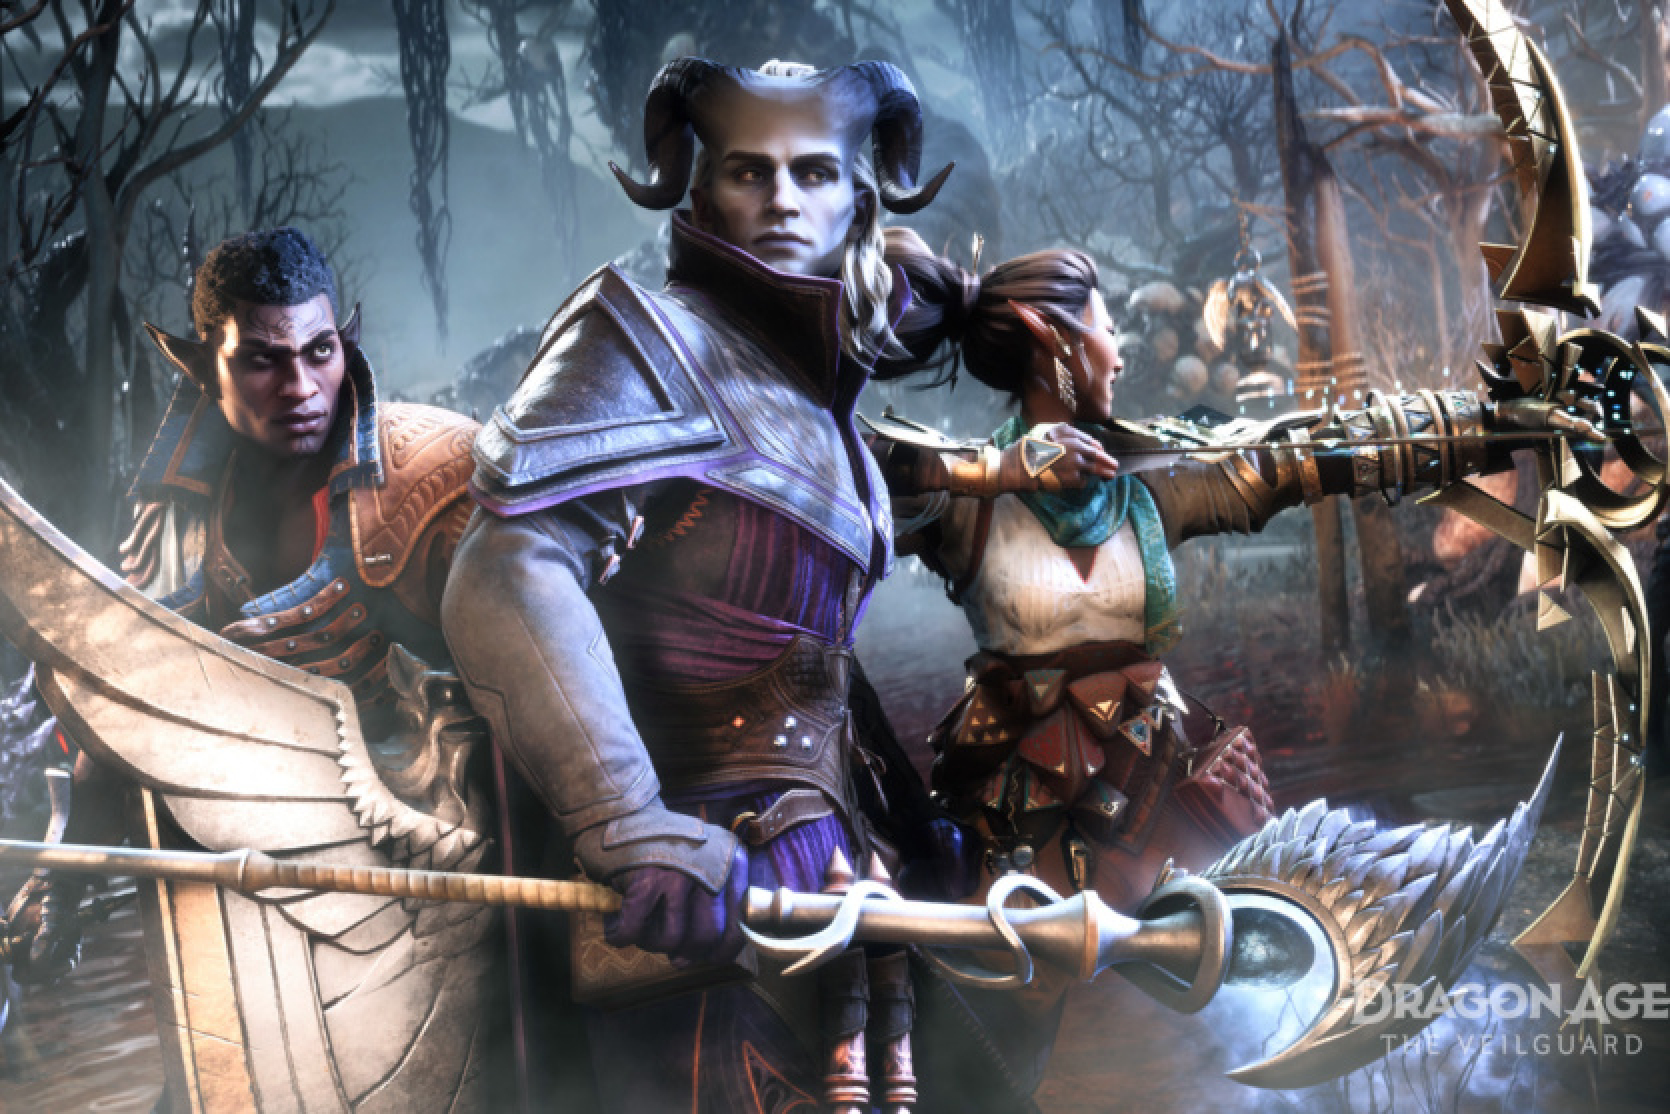 Dragon Age: The Veilguard - 20 minutes of gameplay and a whole lot of information from BioWare